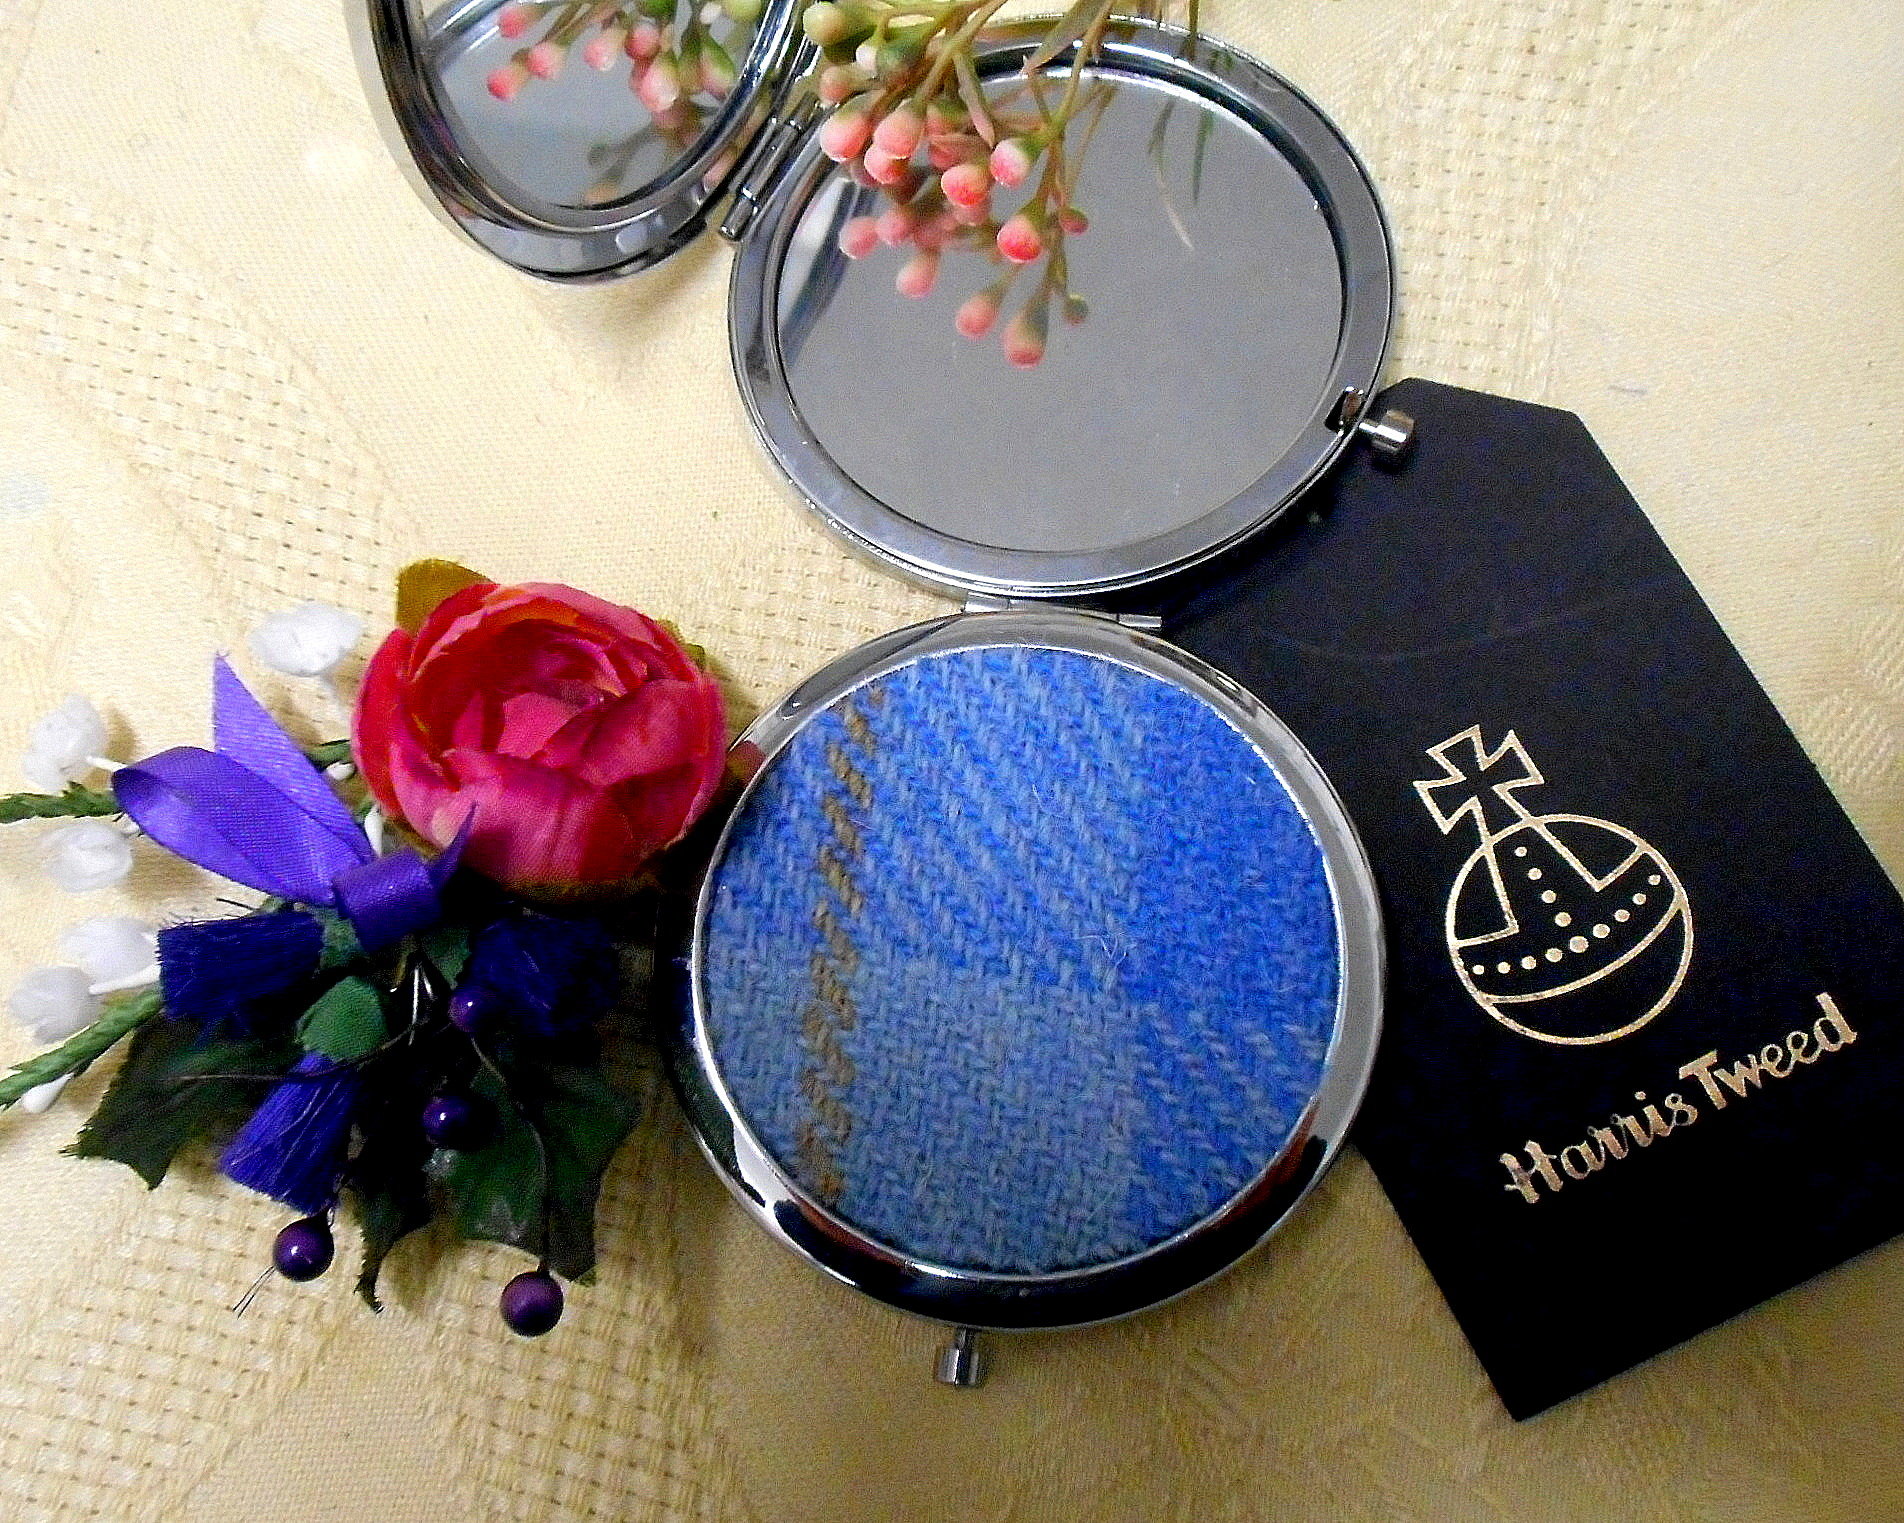 Baby blue plaid Harris Tweed compact mirror  womens gift for Mother, sister, best friend, handbag or pocket accessory, made in Scotland UK